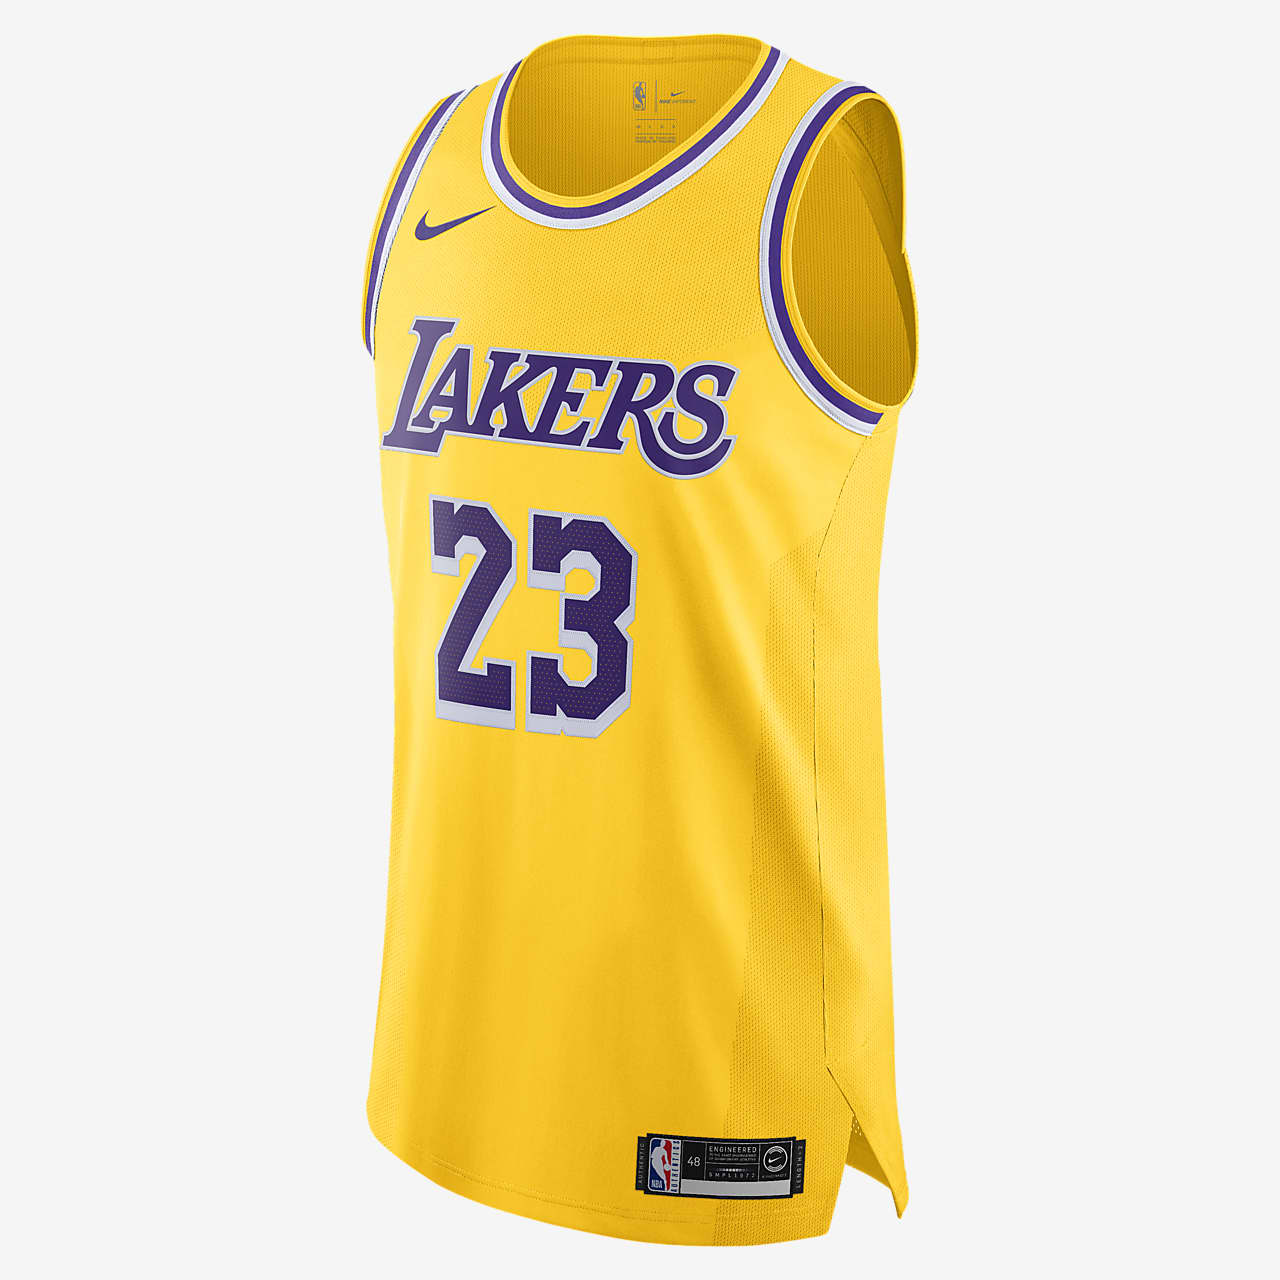 lakers jersey dress lebron Off 62% - www.bashhguidelines.org